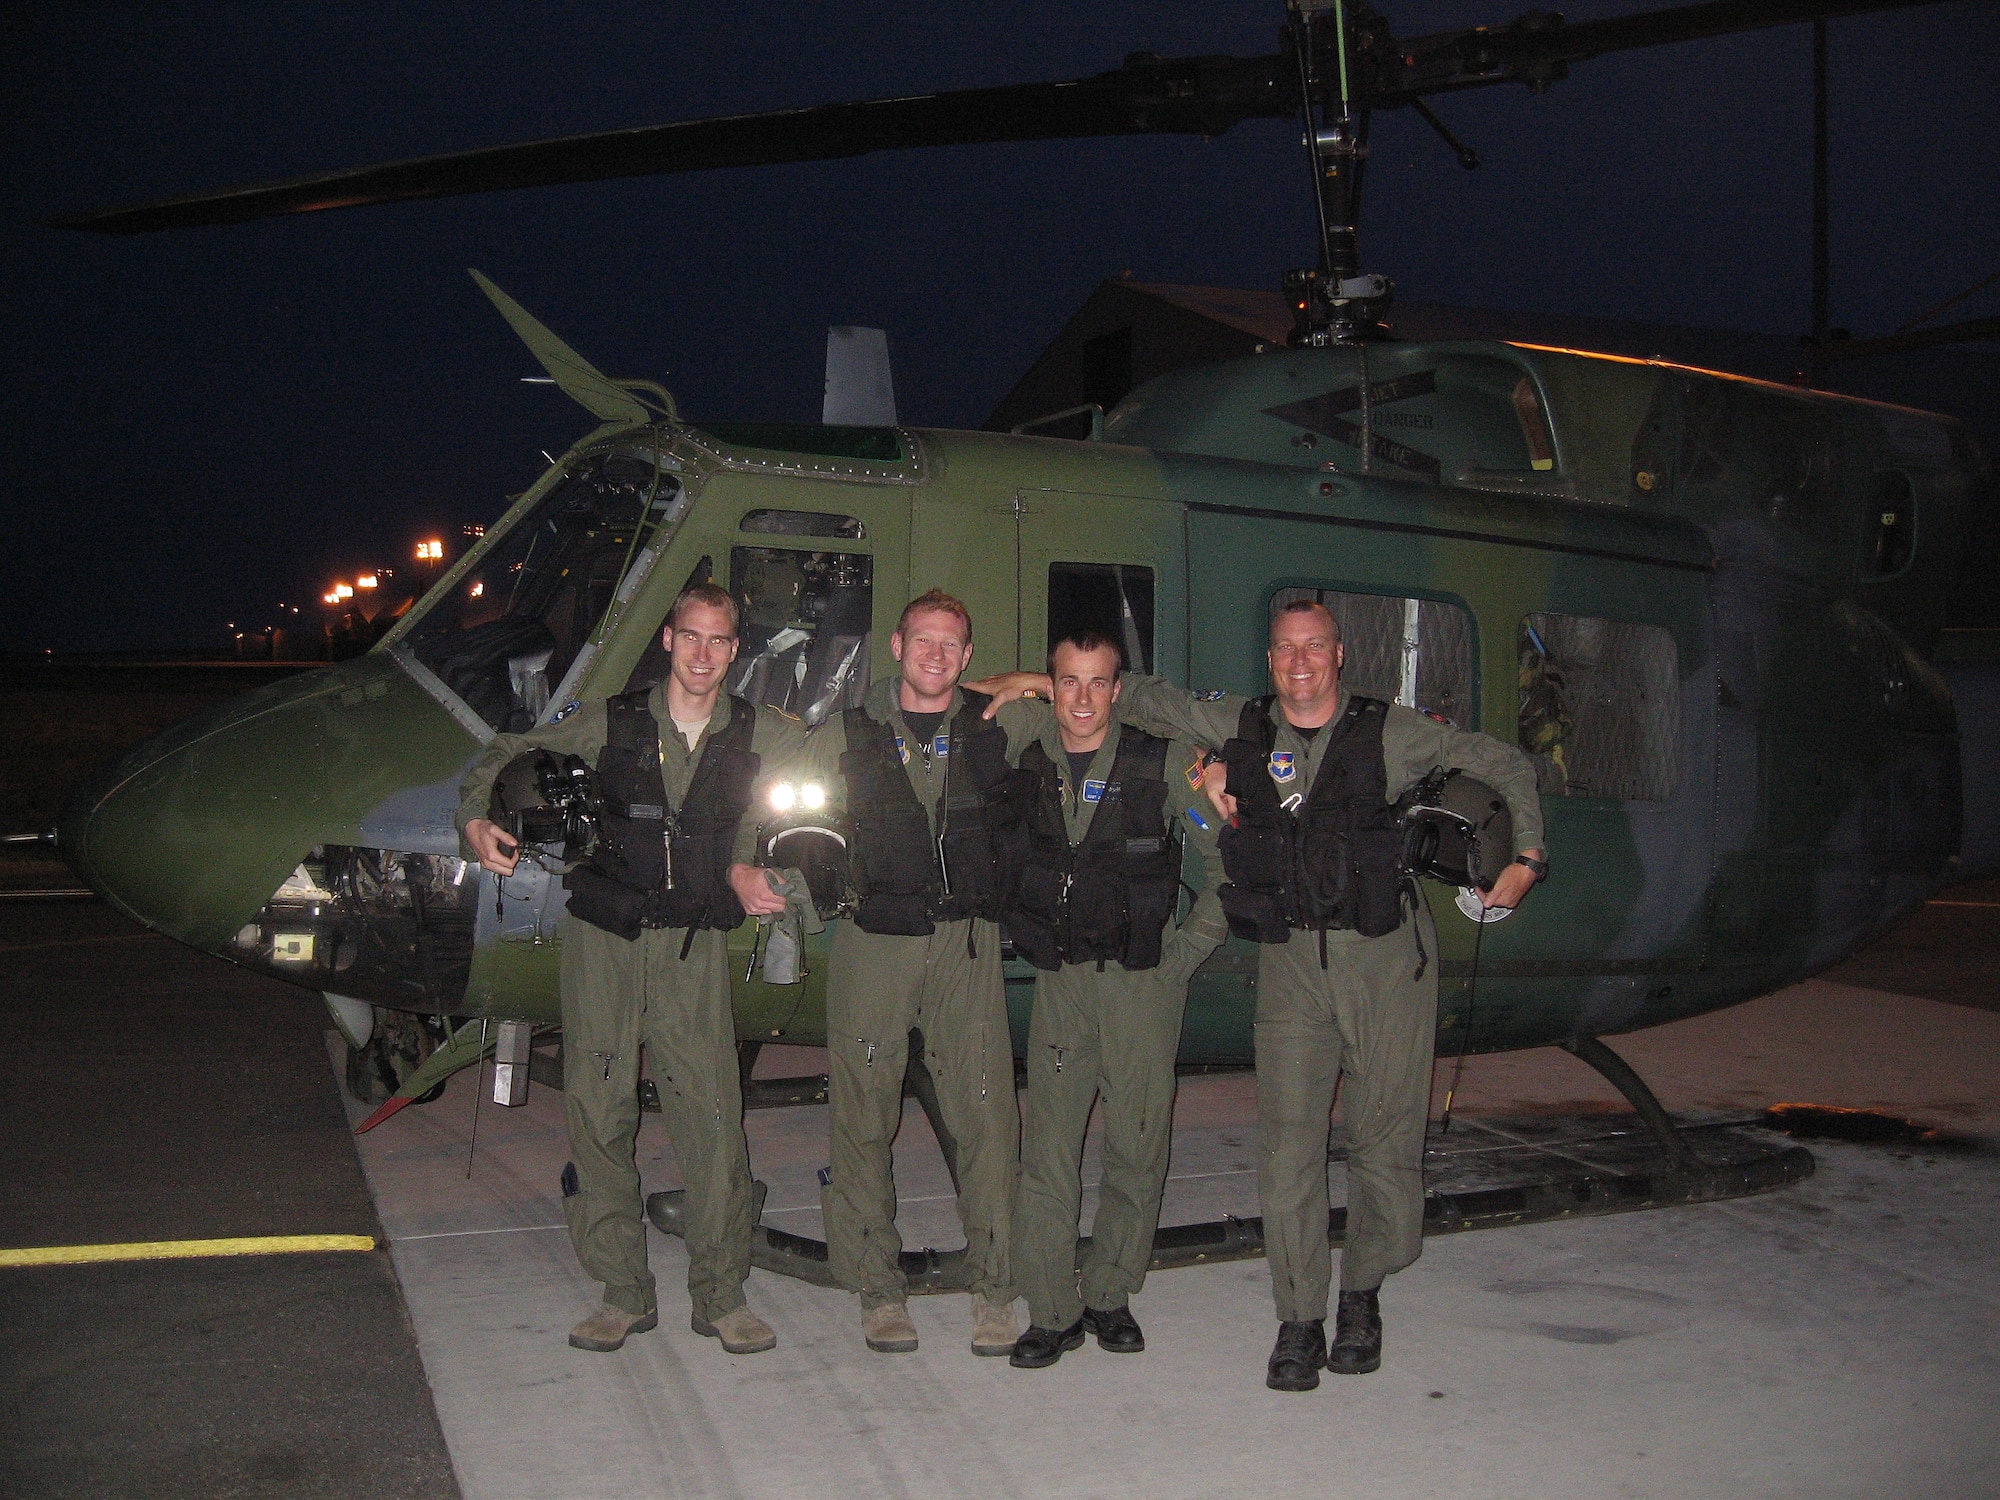 The crew from the 36th Rescue Flight that made the 634th save poses in front of a helicopter. From left to right: 1st Lt. Stephen Jones, copilot; Capt. Brent Golembiewski, pilot; Staff Sgt. Jacob Bragg, flight engineer; Master Sgt. Patrick Hunt, medic. (Courtesy photo)